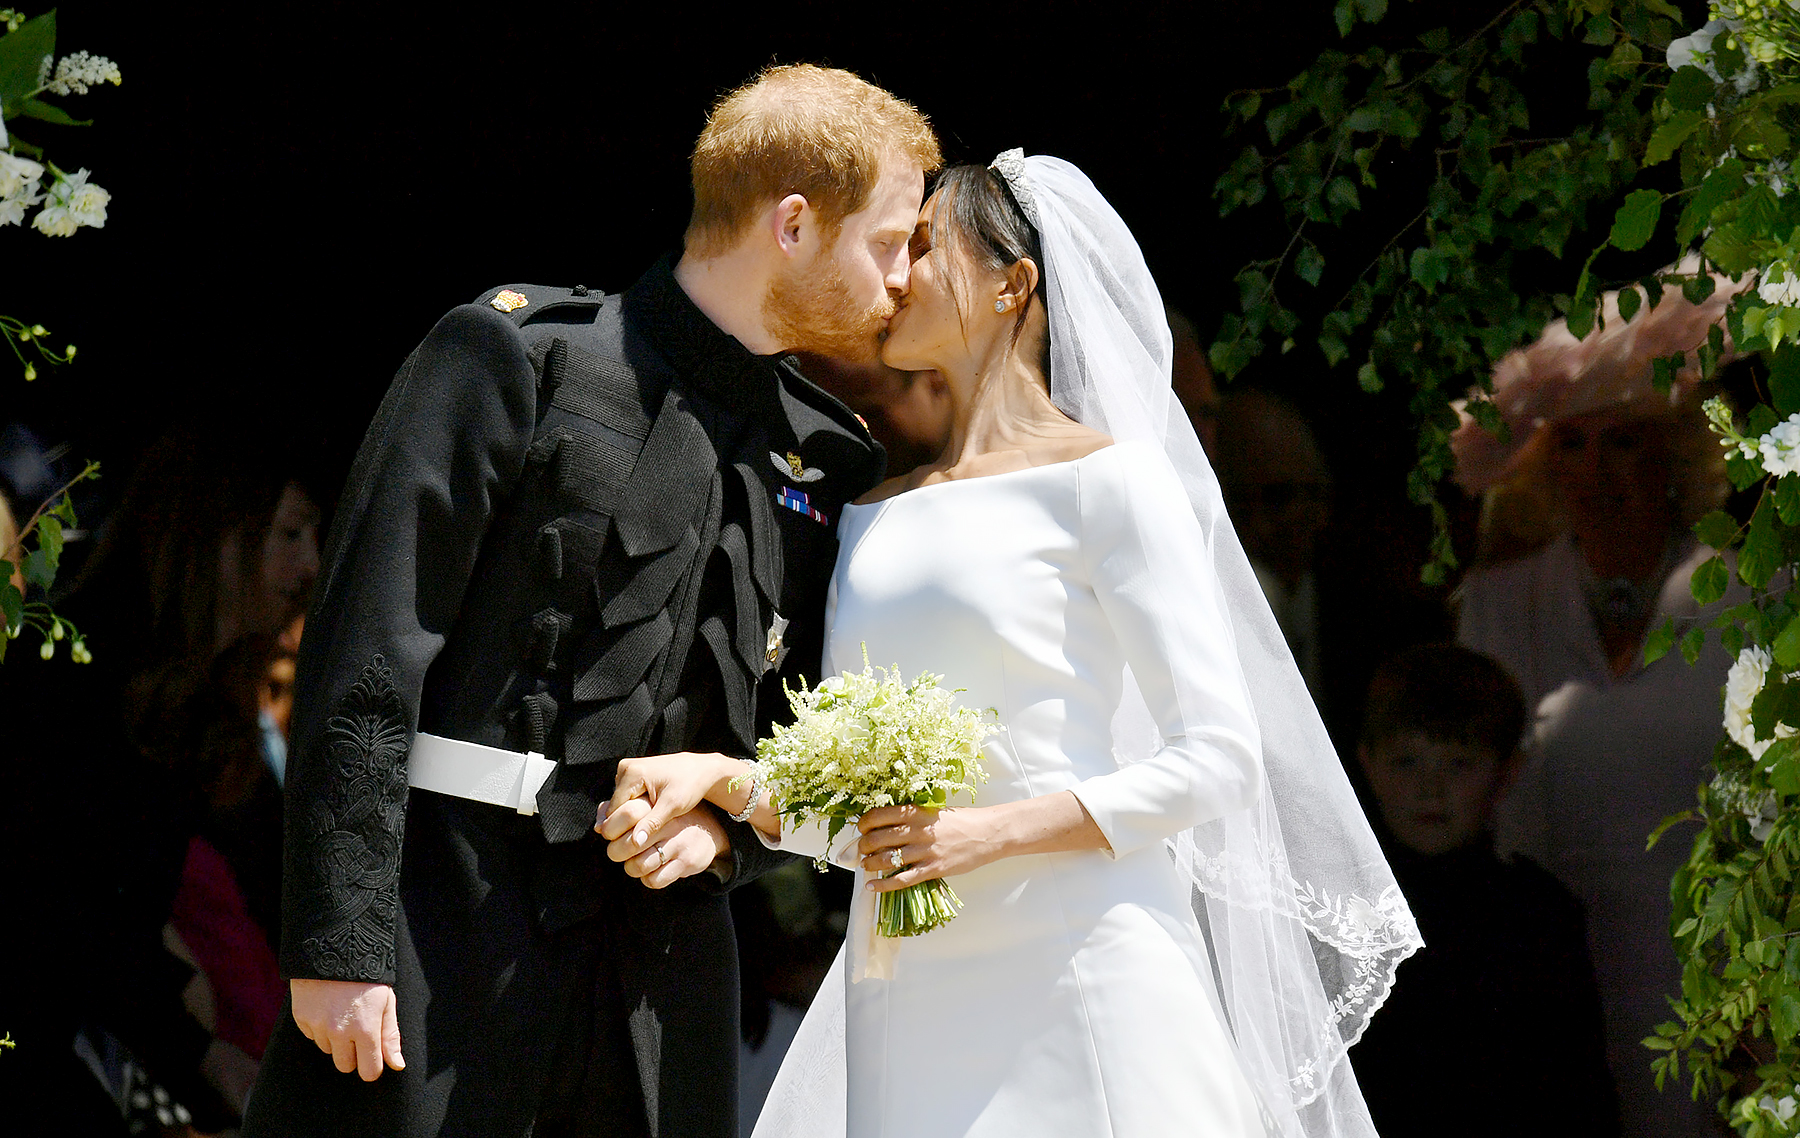 Prince Harry, Duchess Meghan's First Kiss as Married Couple